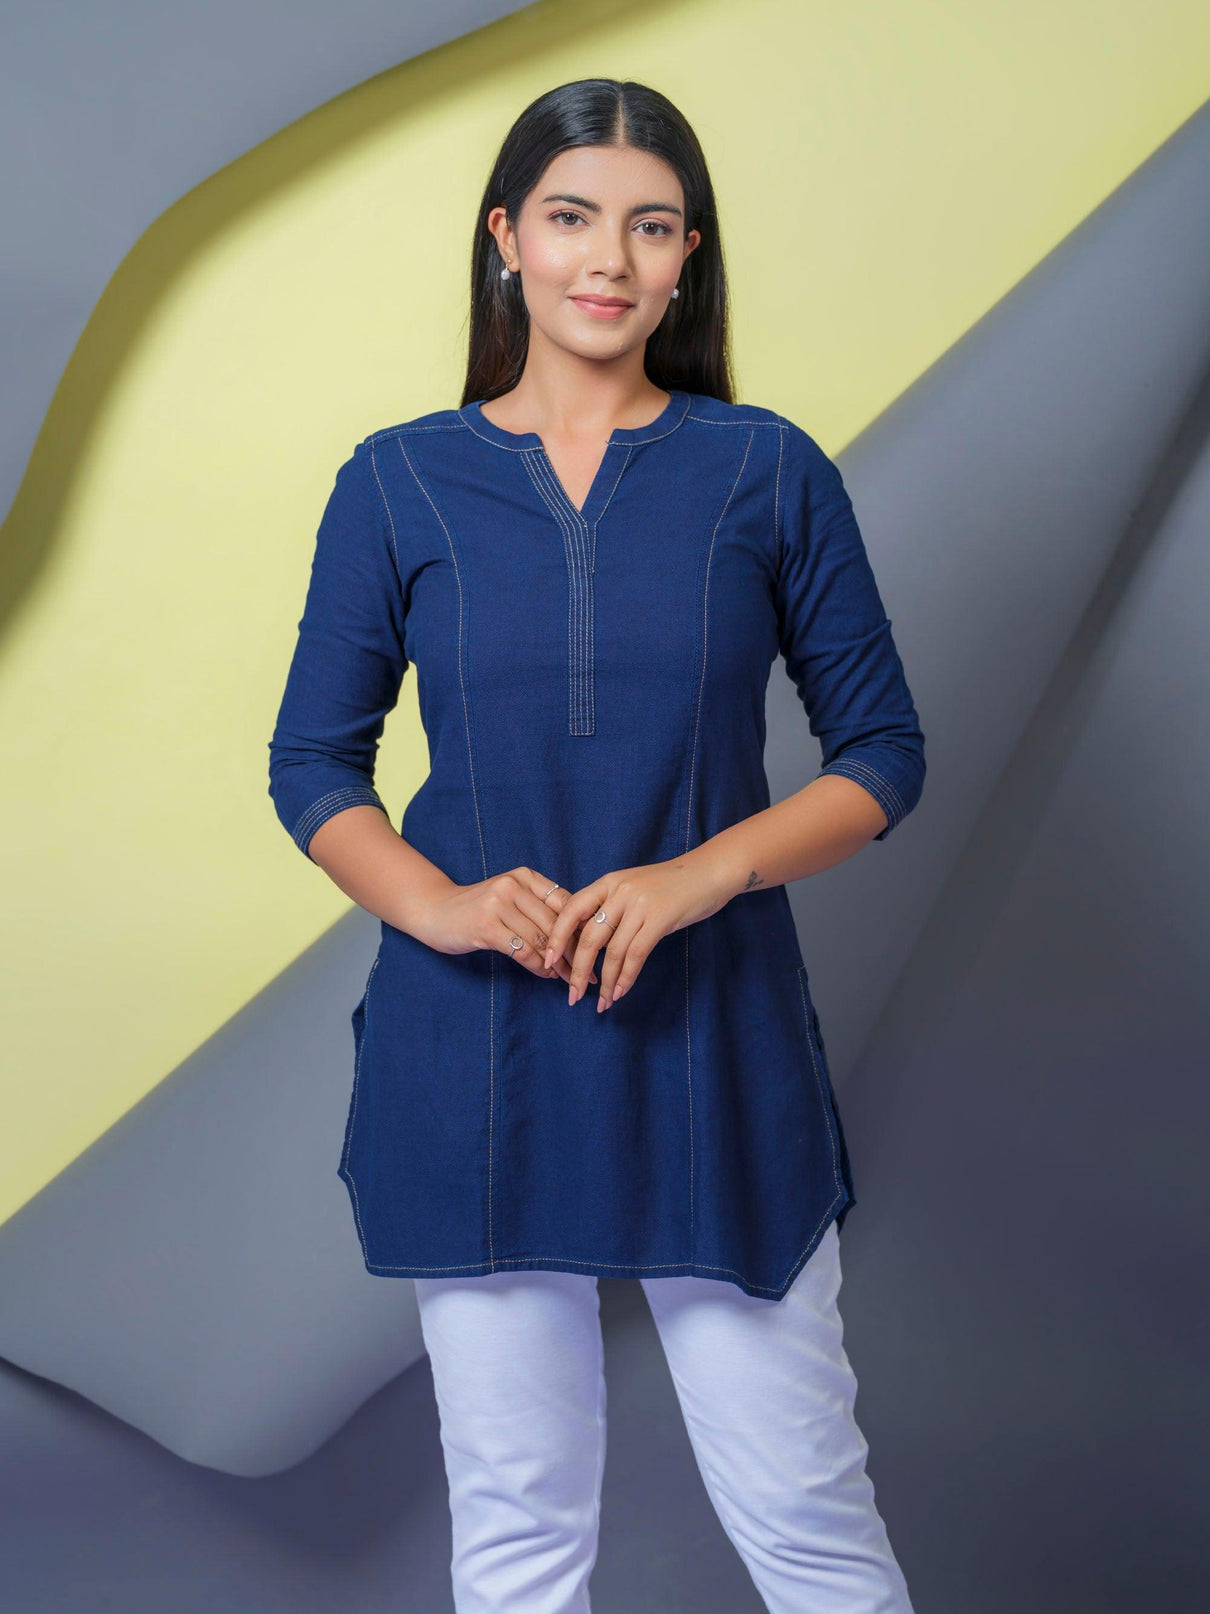 Denim Top With Top Stitch Details at Placket and Sleeves Etiquette Apparel